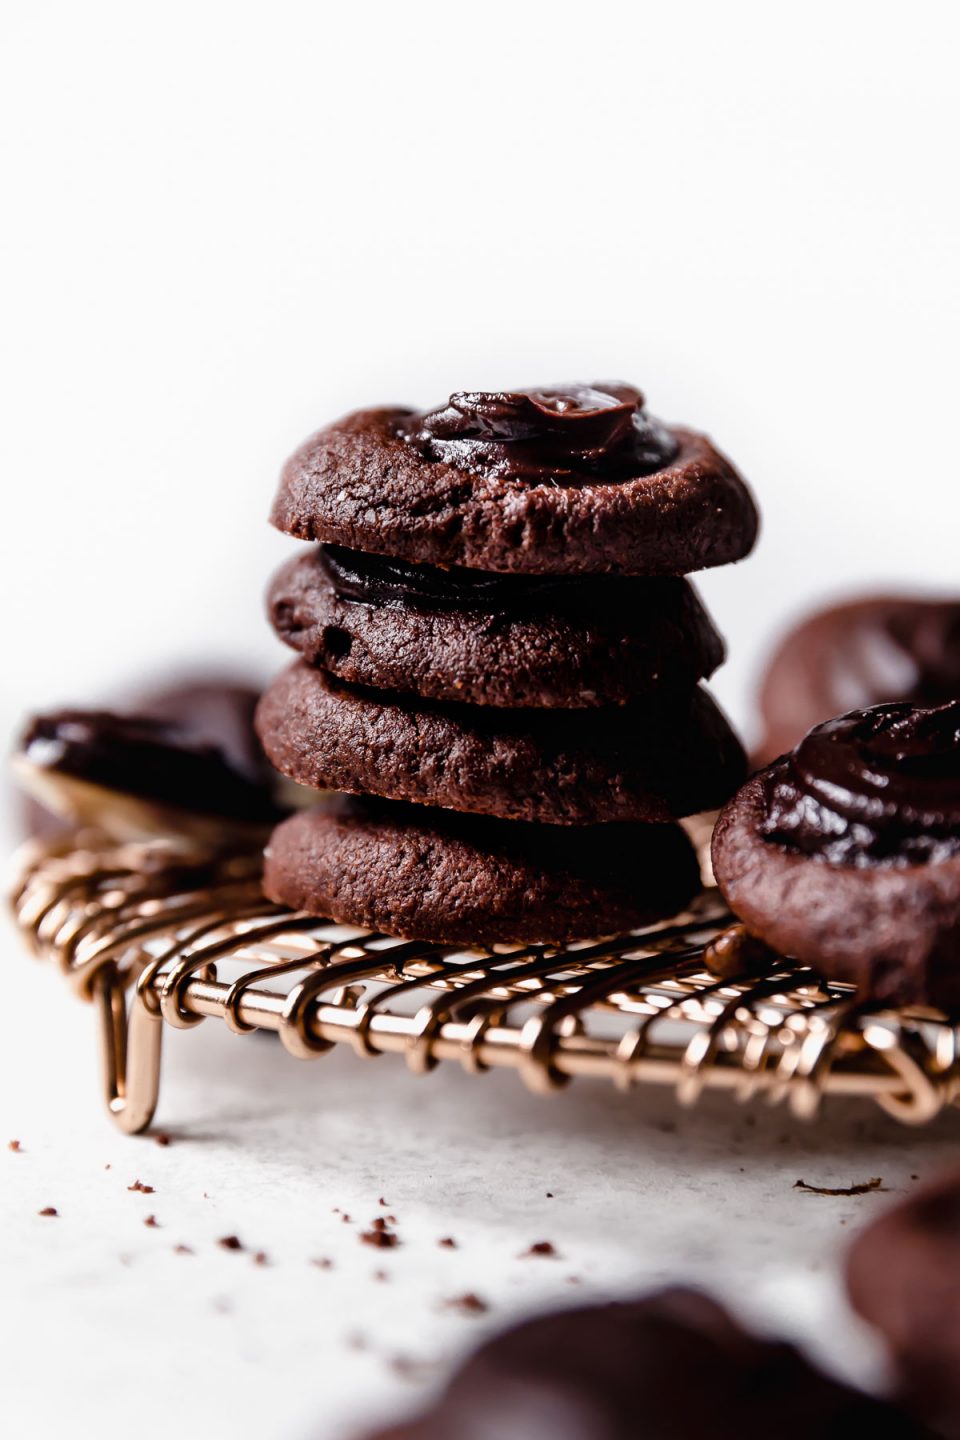 A stack of 4 double chocolate thumbprint cookies placed on a copper wire cooling rack. The stack is surrounded by additional cookies & a spoonful of fudgy ganache.